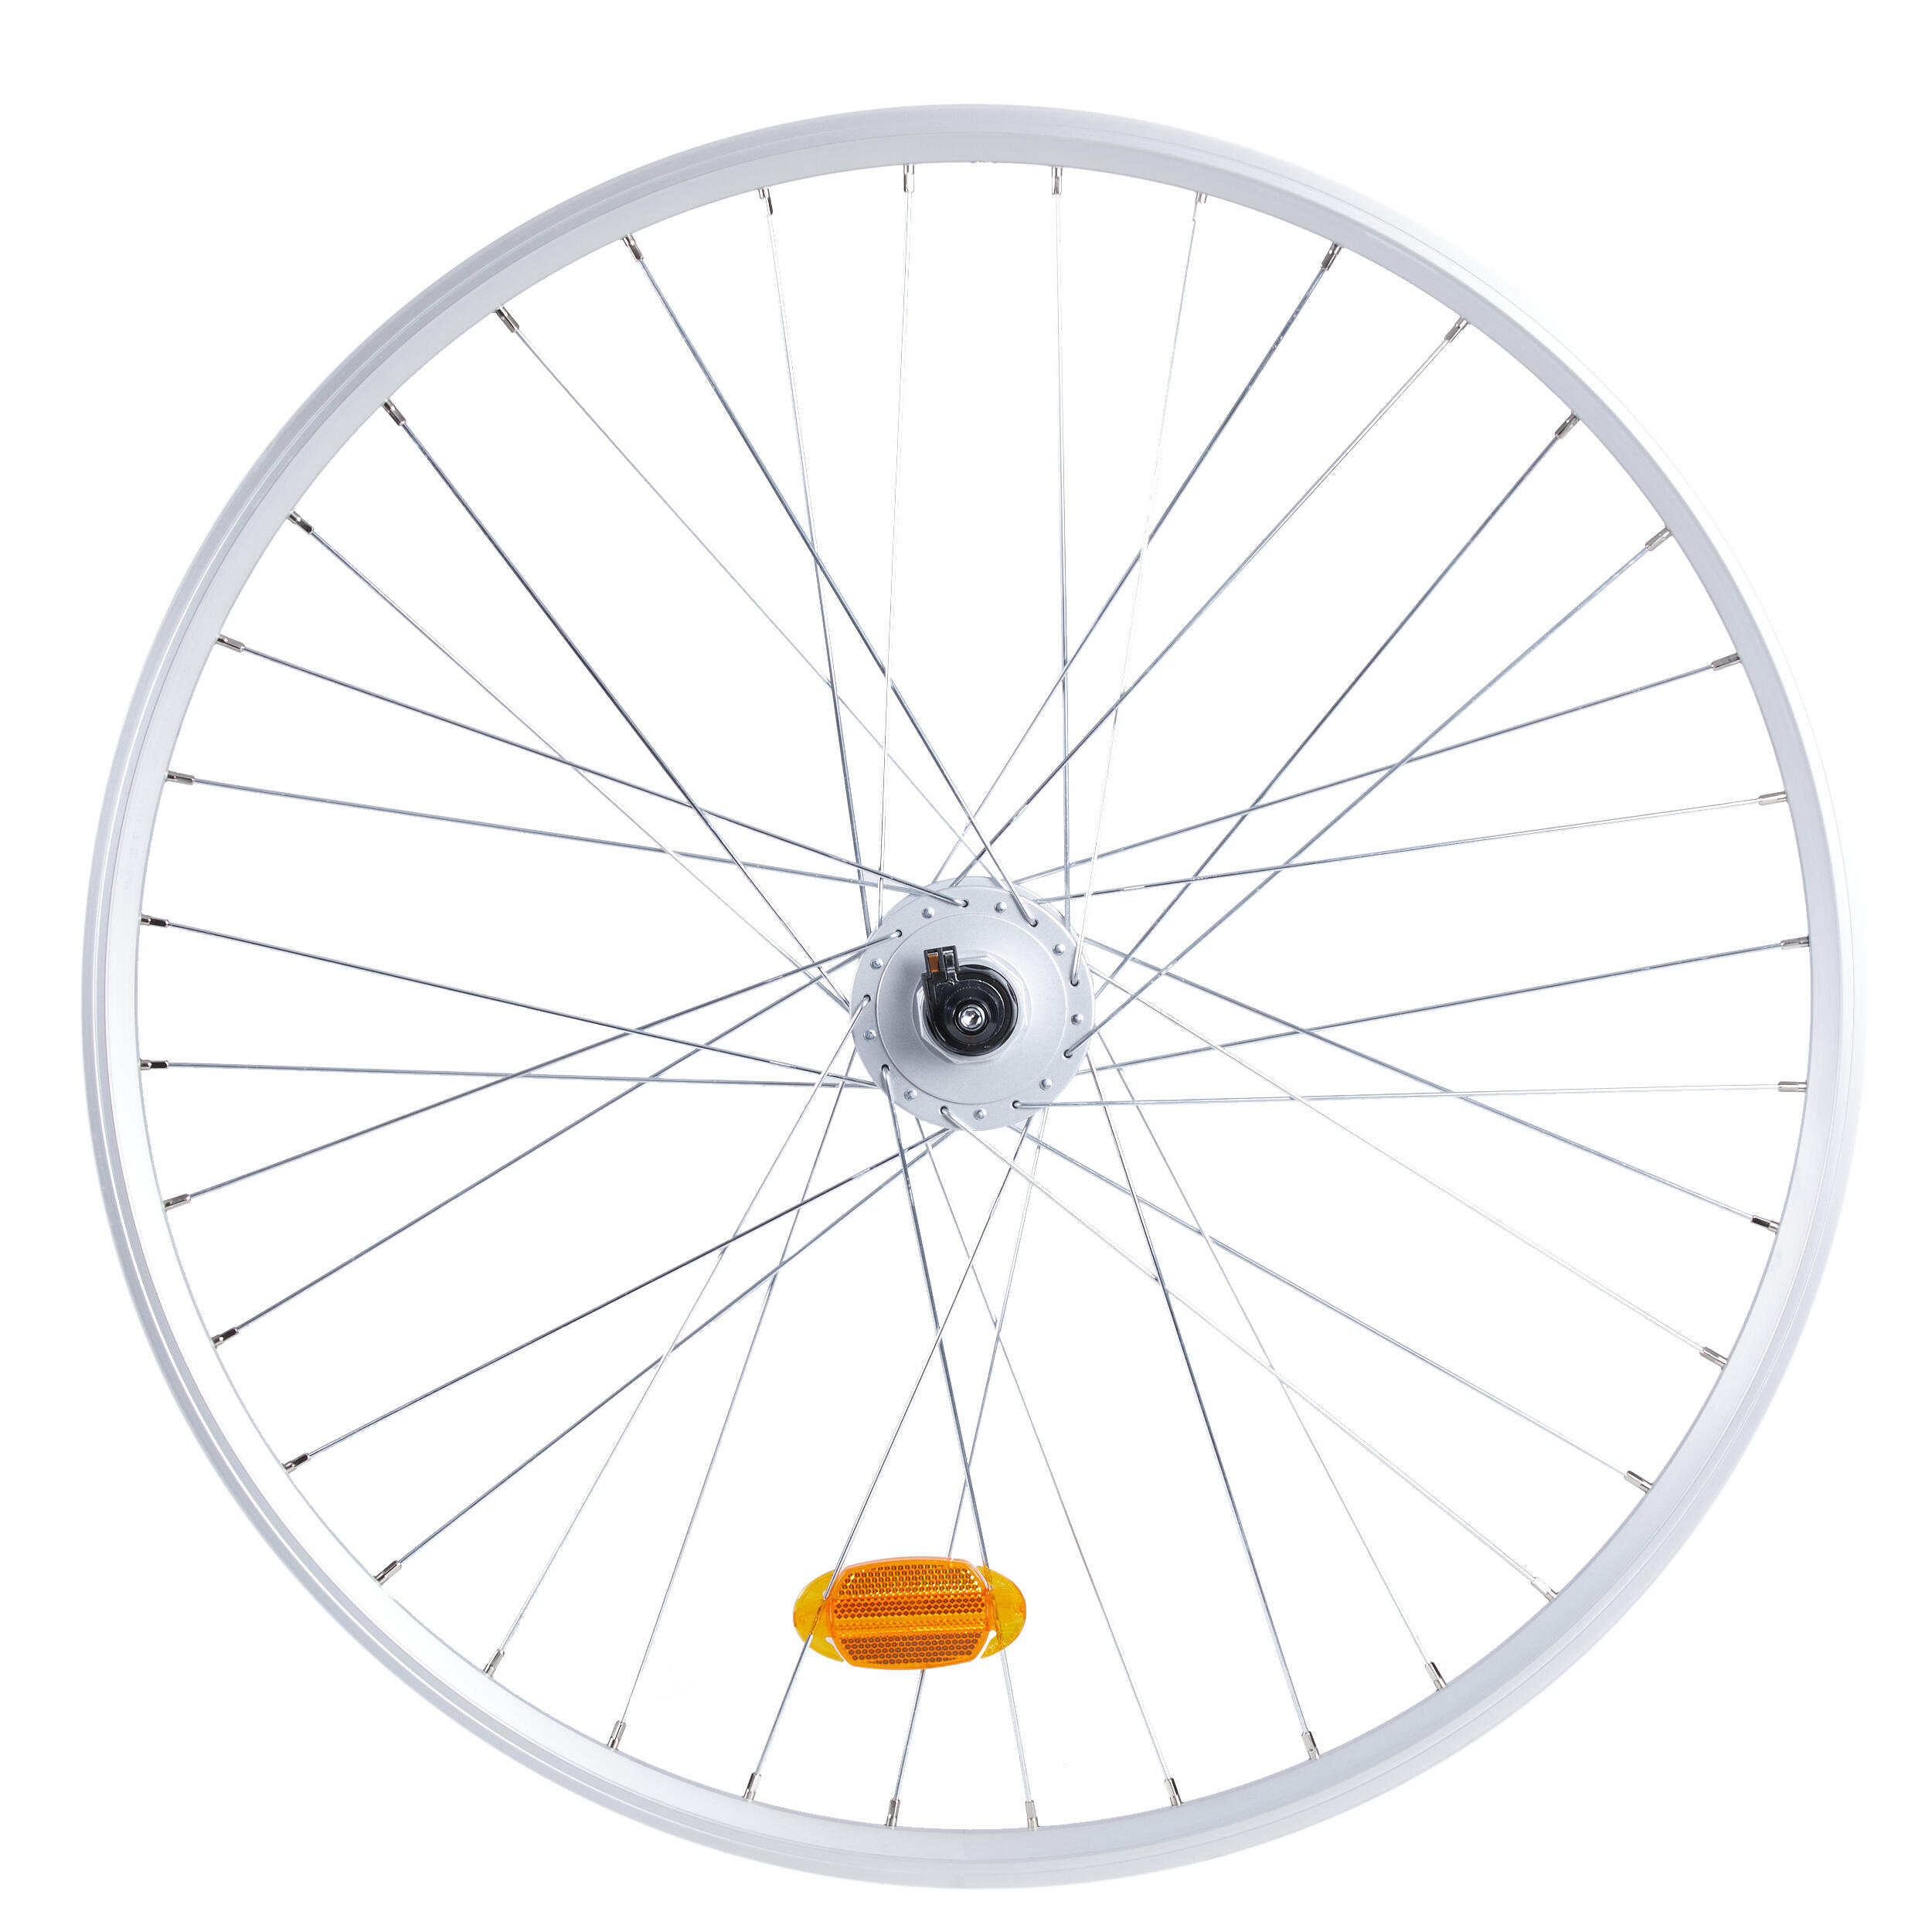 28" Double-Walled V-Brake Quick-Release Wheel for City Bike - Silver 1/2